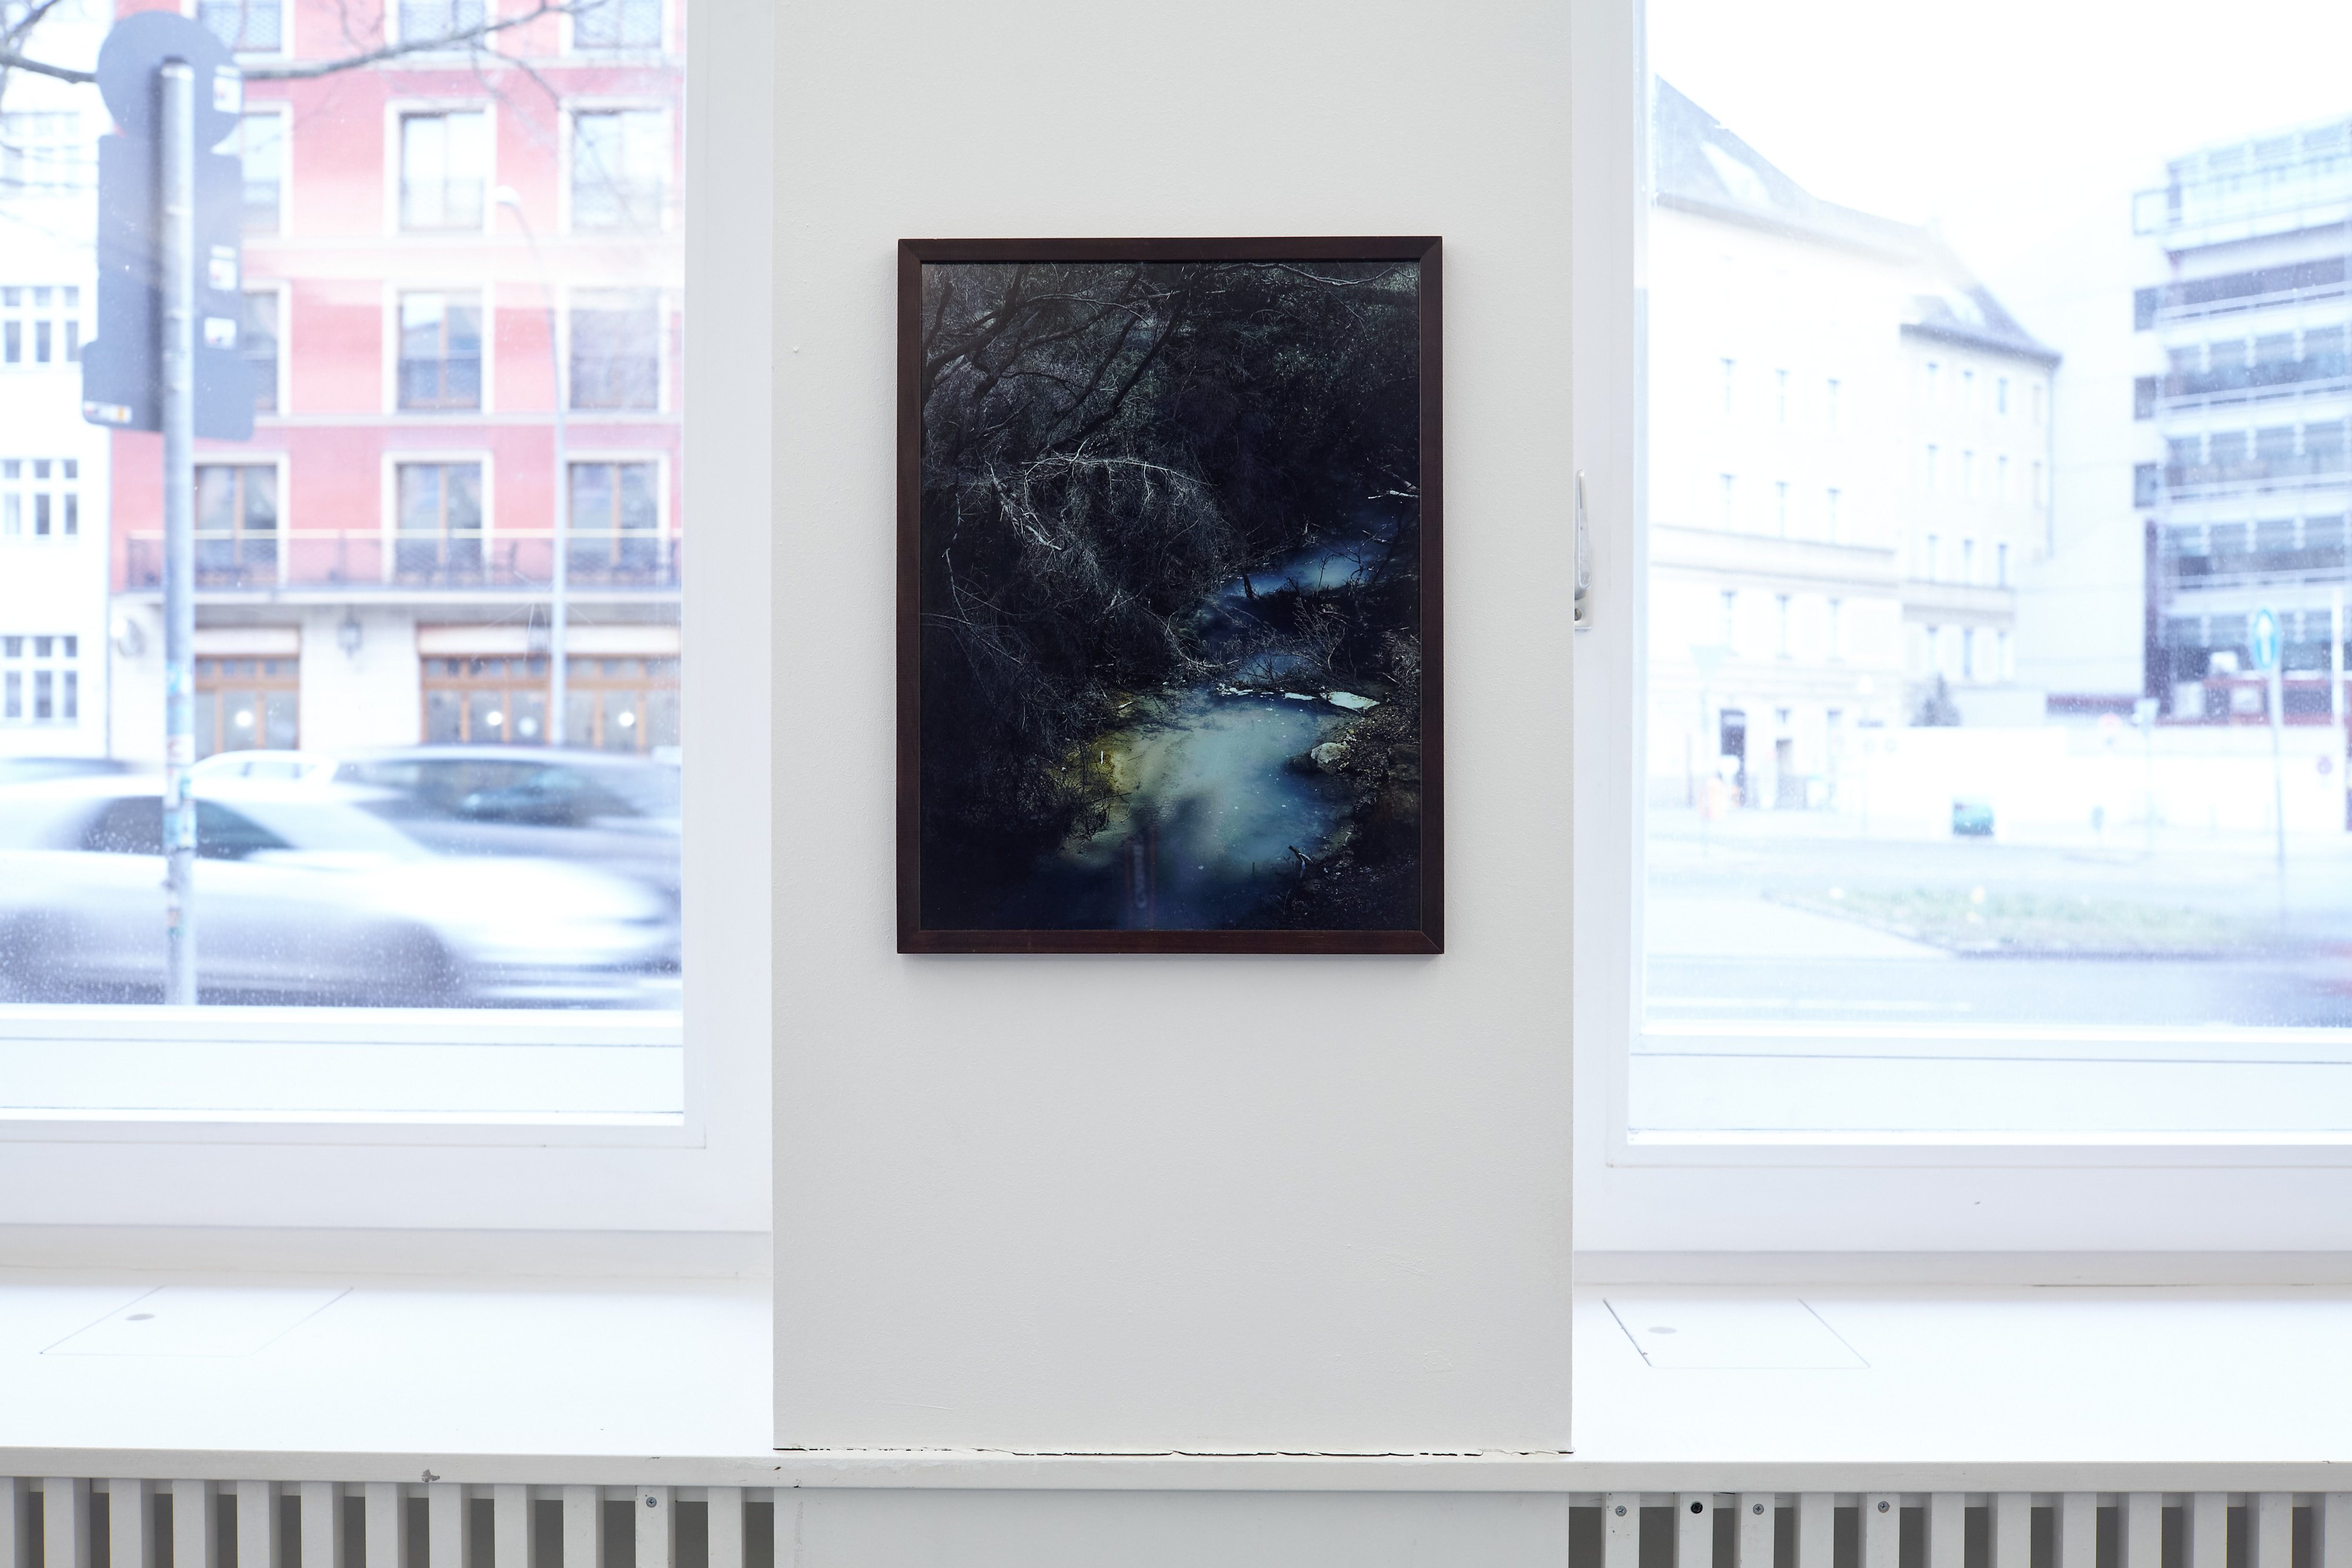 Installation view of "The Moon And I" by Carola Plöchinger at the PEP (Photographic Exploration Project) New Talents 2021 Exhibition at Kommunale Galerie Berlin.